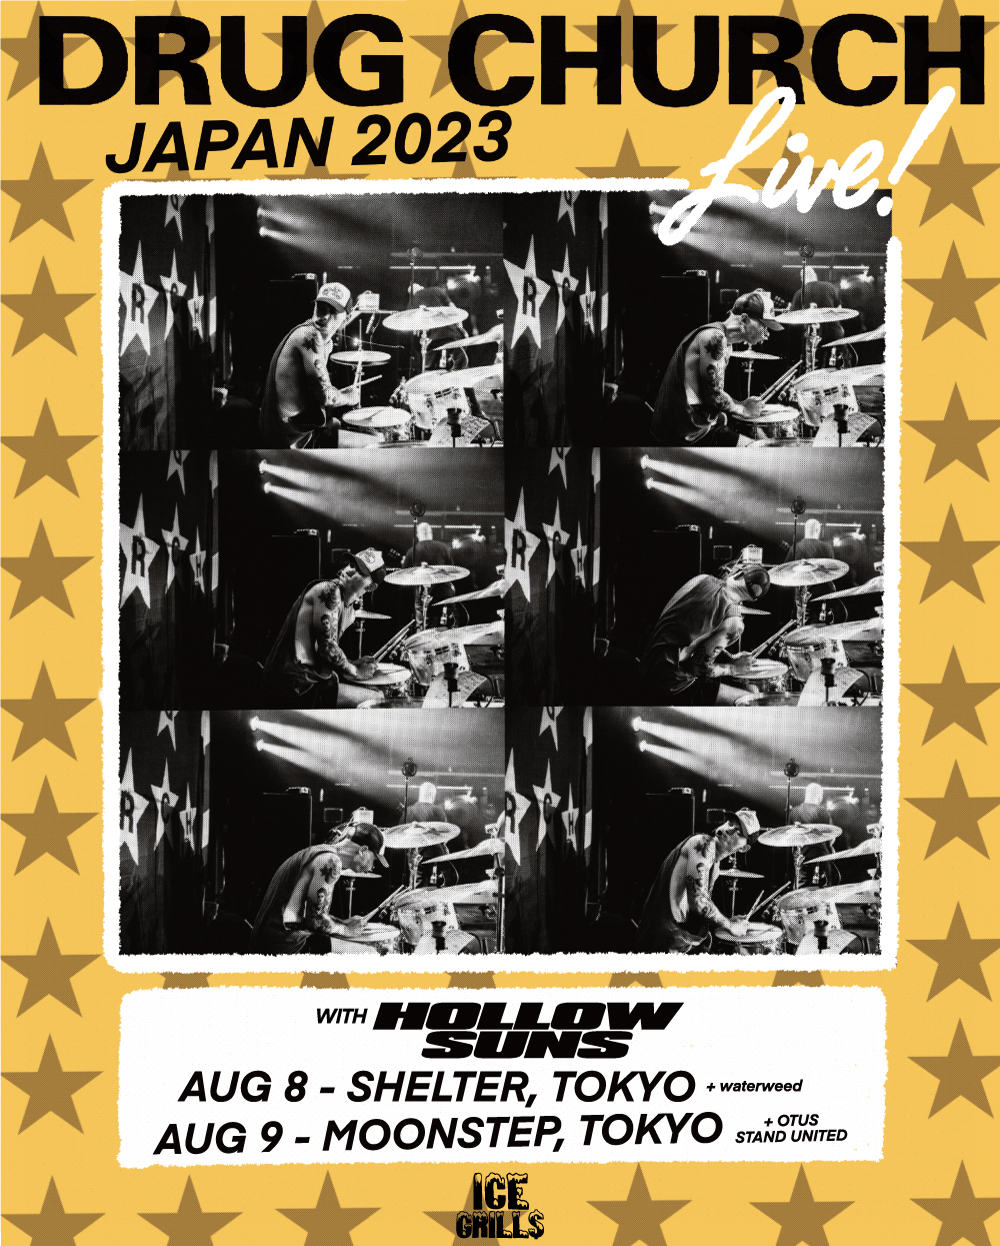 Drug Church – Japan 2023 guest bands added / Tickets on sale now